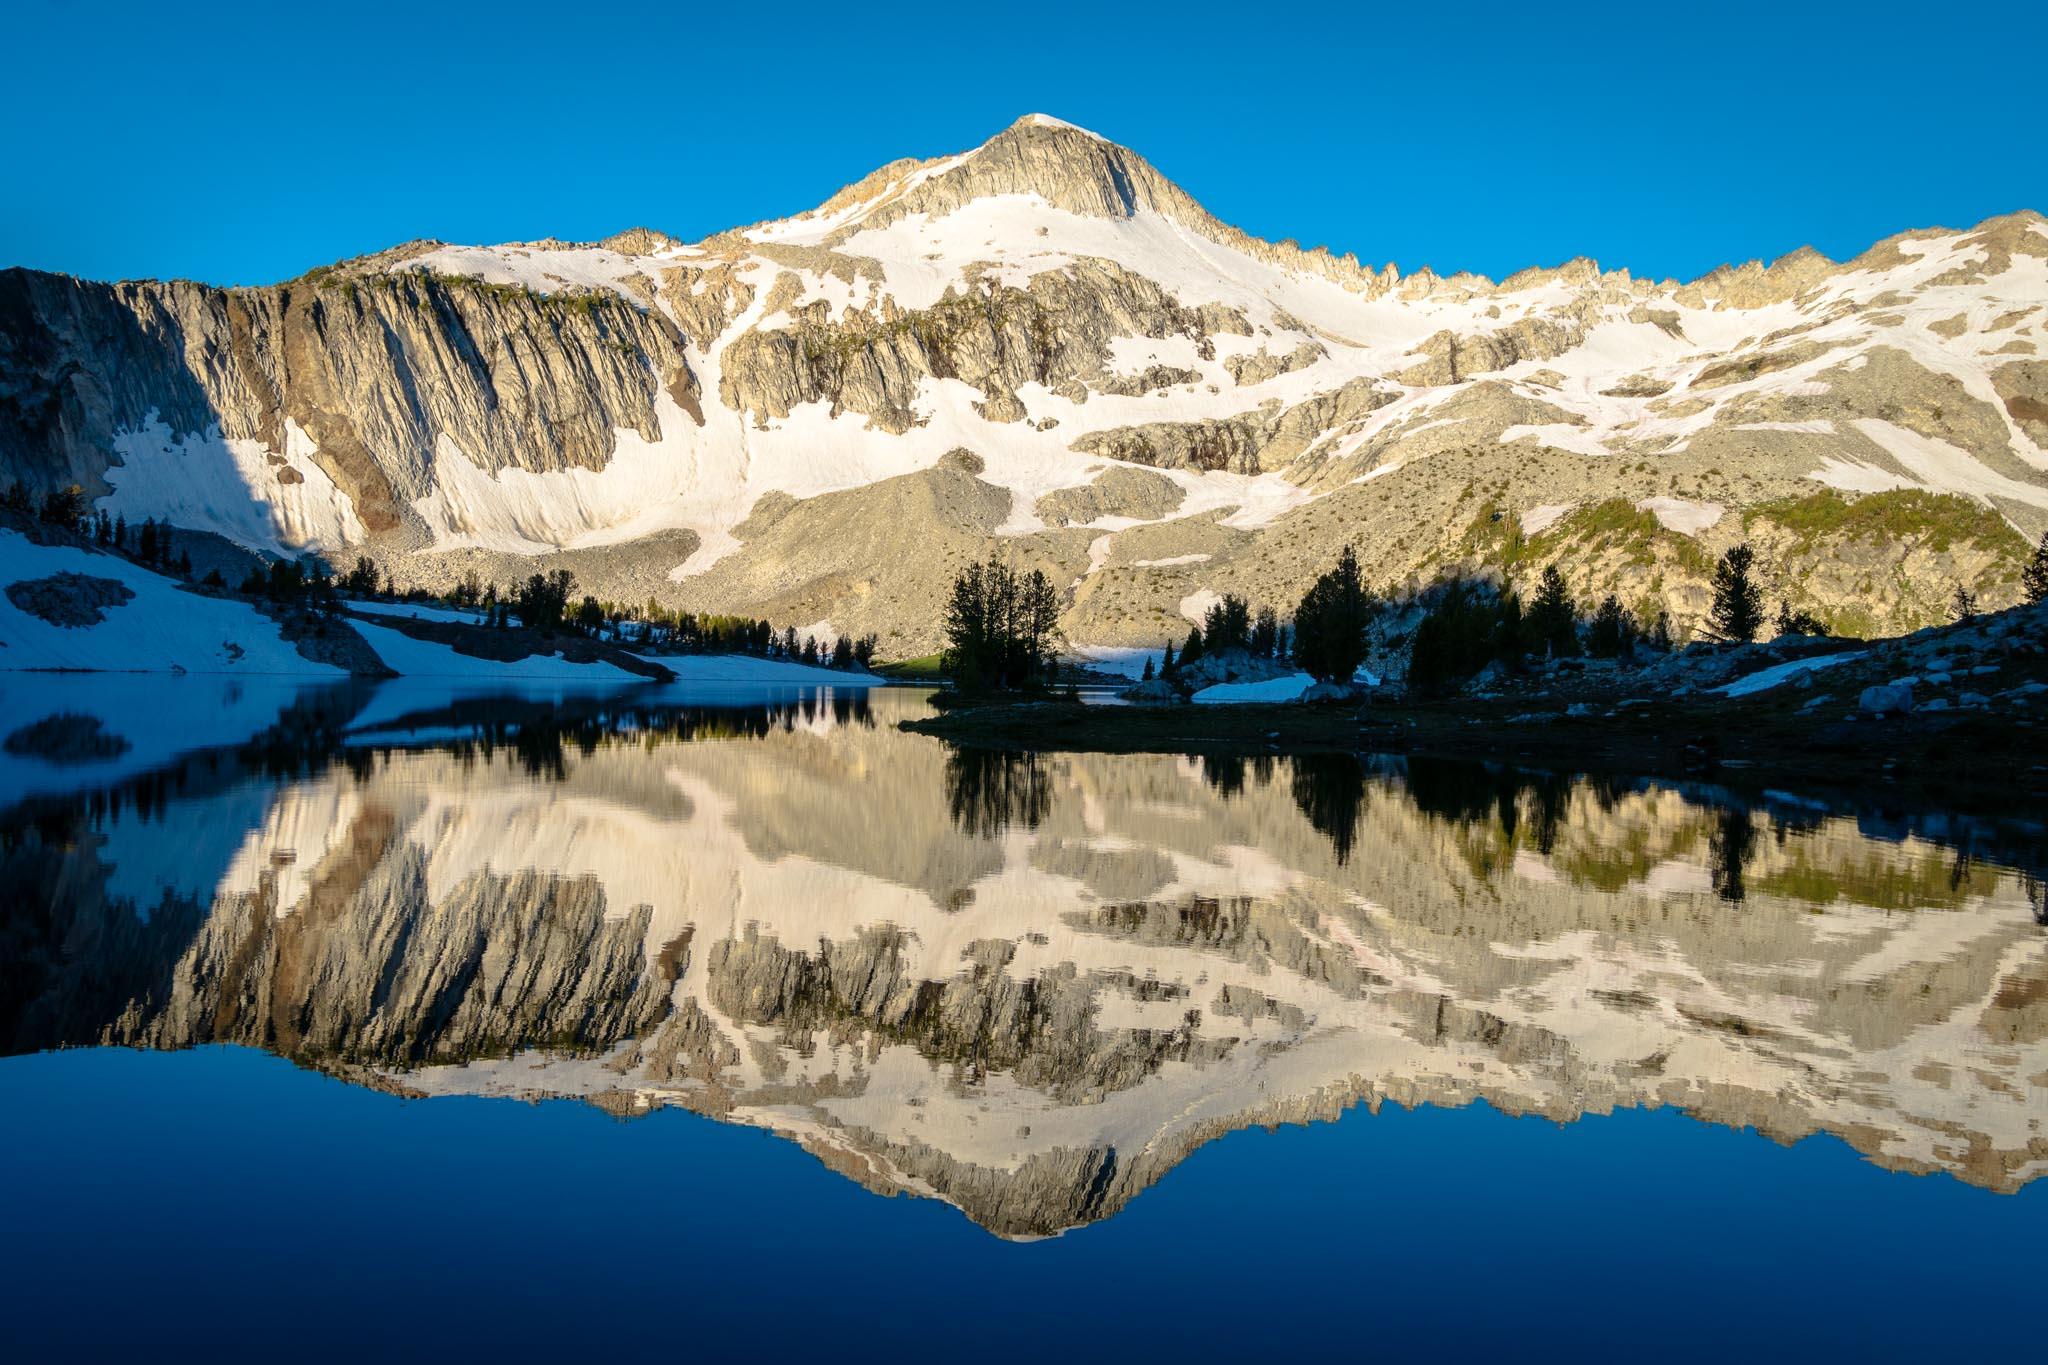 Glacier Lake reflection in the early morning light